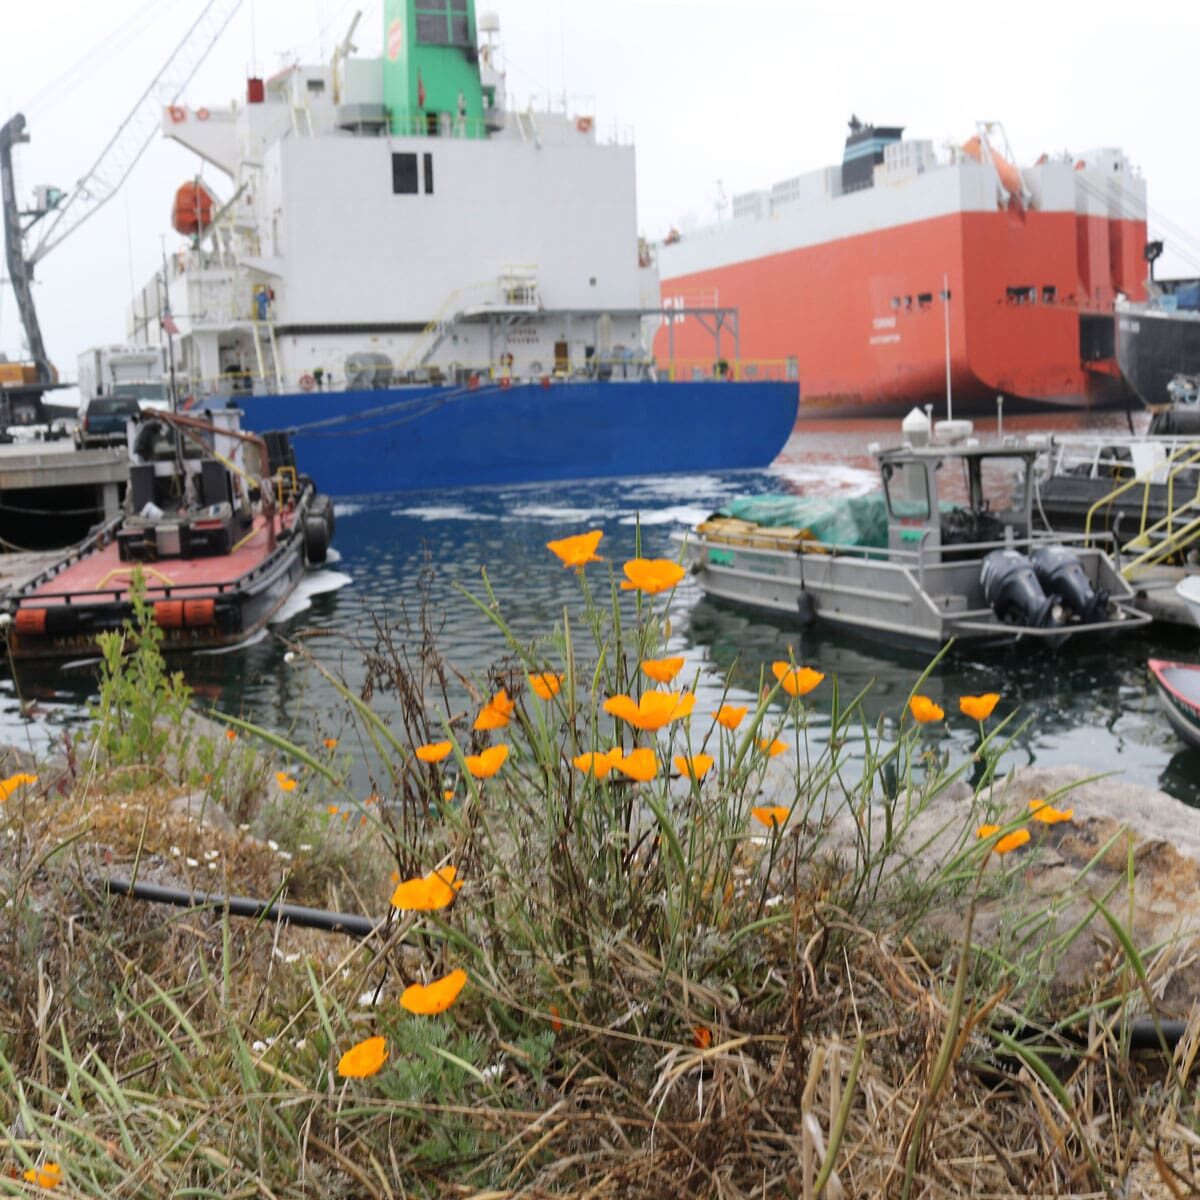 A variety of boats, including cargo ships, are docked in a marina. In the foreground, orange wildflowers are growing on a grassy area near the water, creating a picturesque home-like atmosphere.